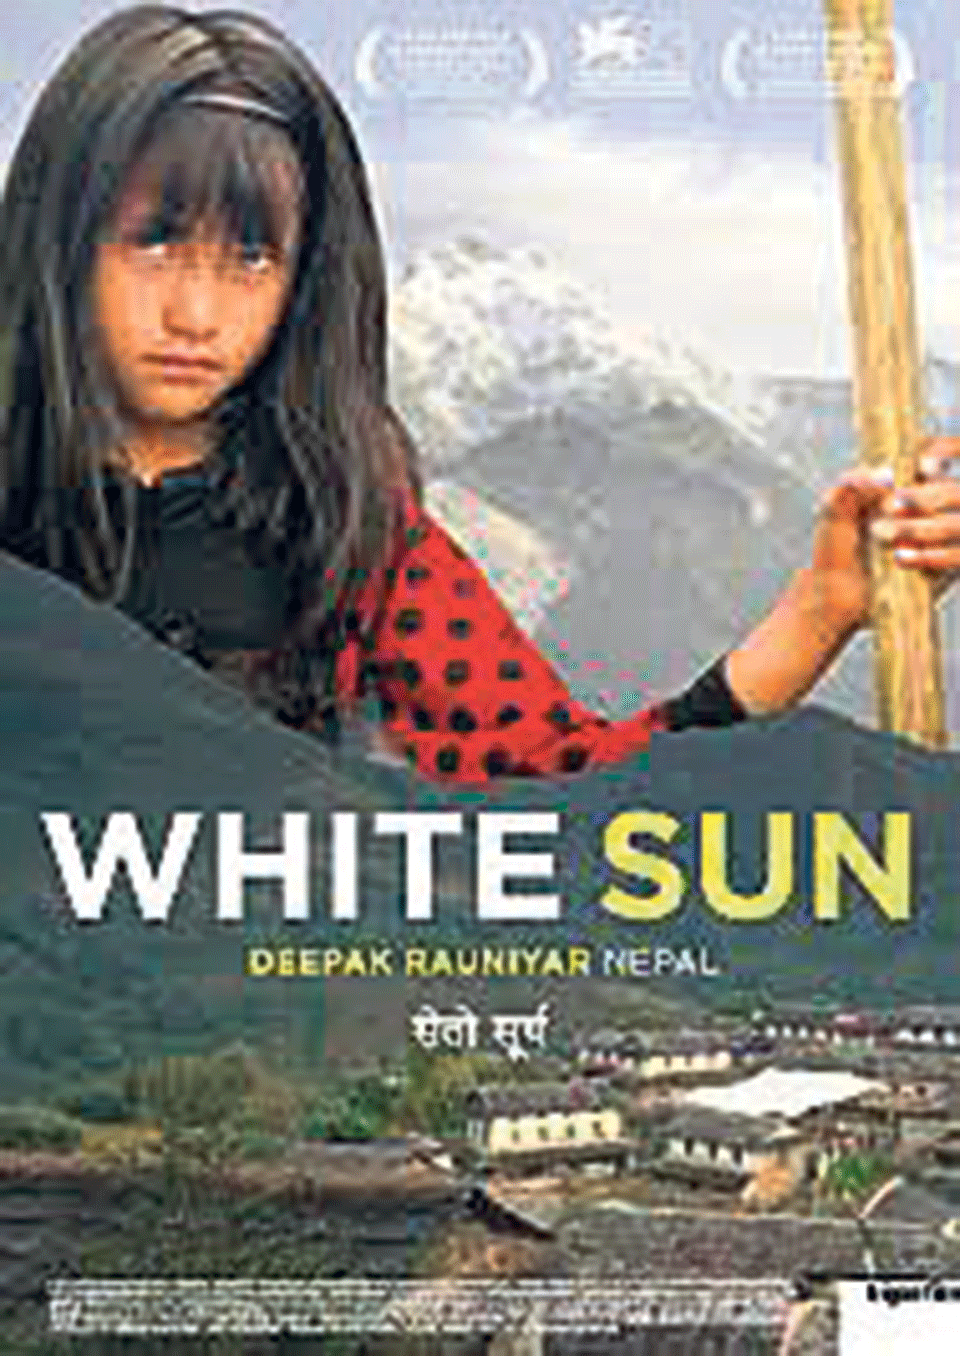 ‘White Sun’ to represent Nepal in Academy Awards